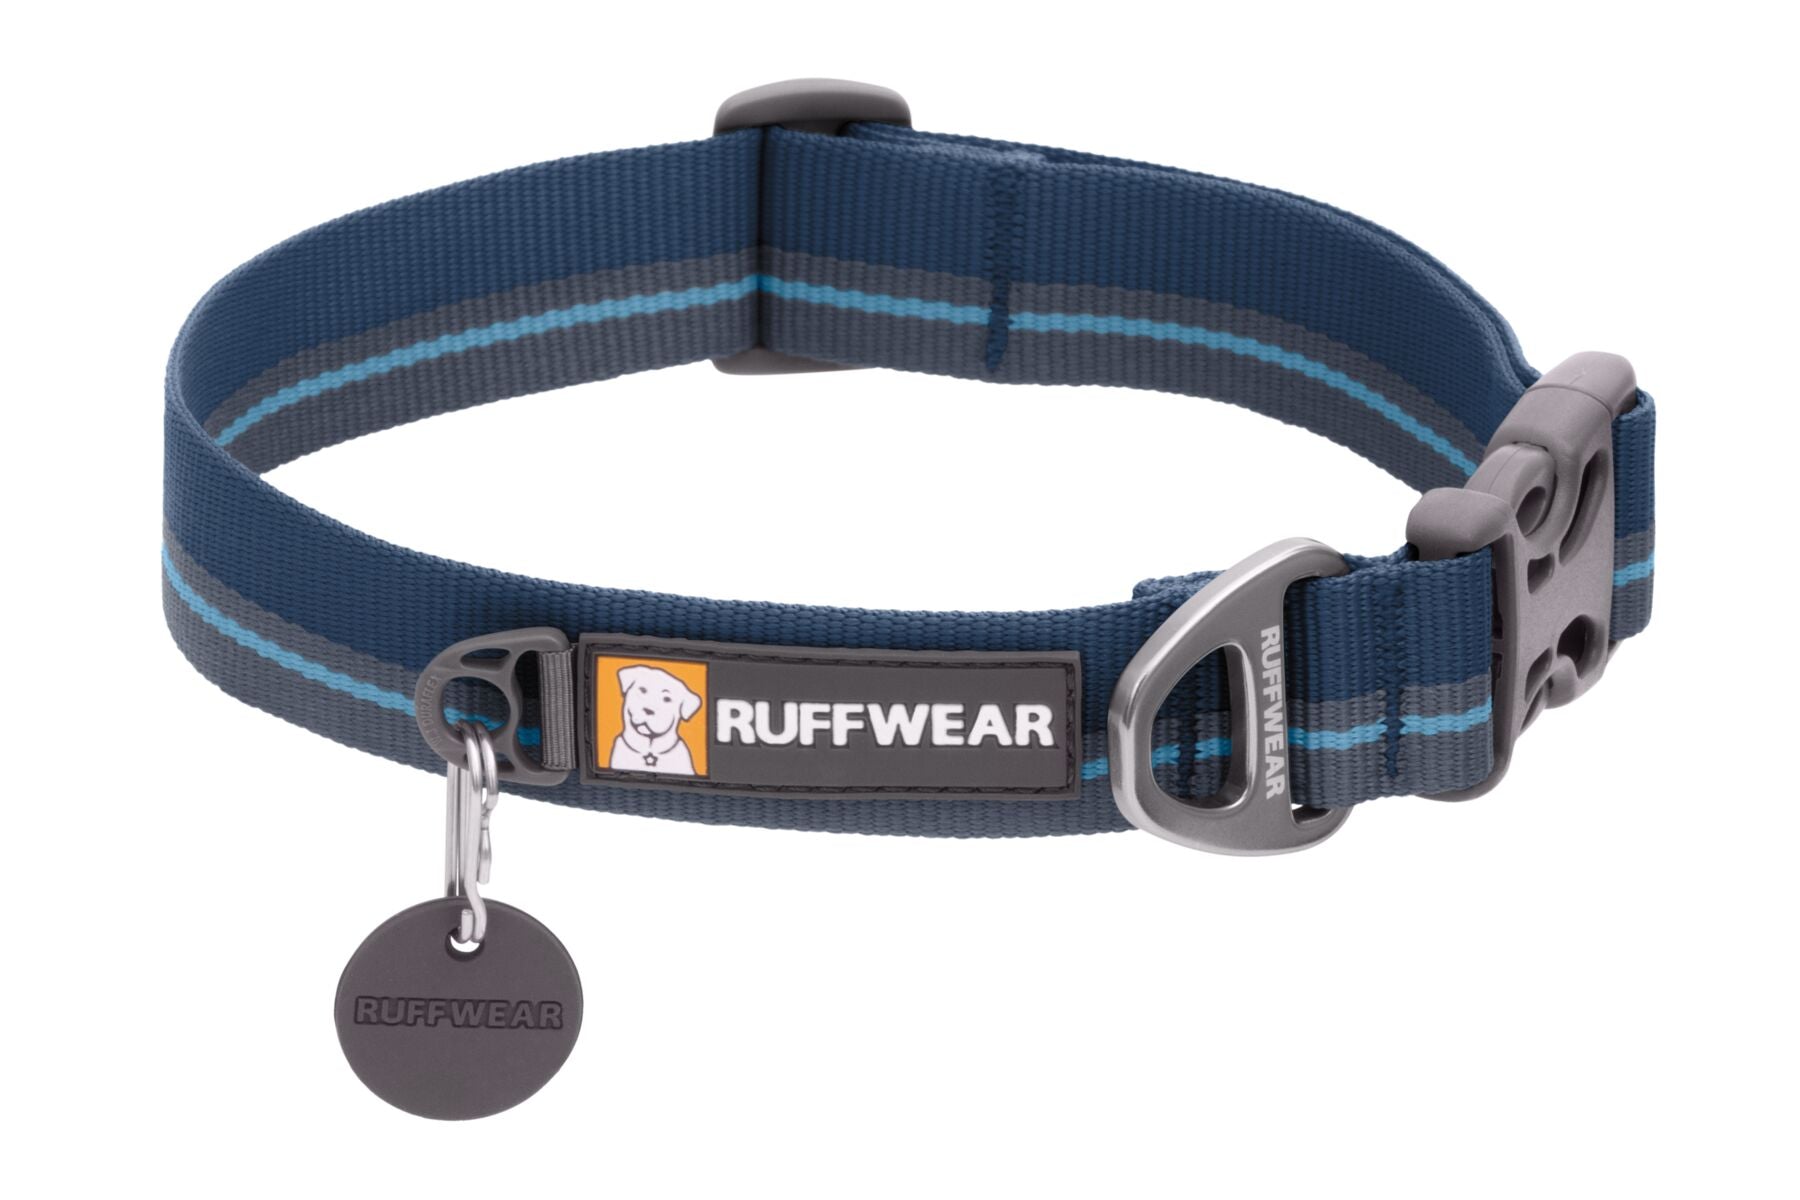 Side Release Buckle Strap - Assorted Colors 1 x 36 - Alpenglow